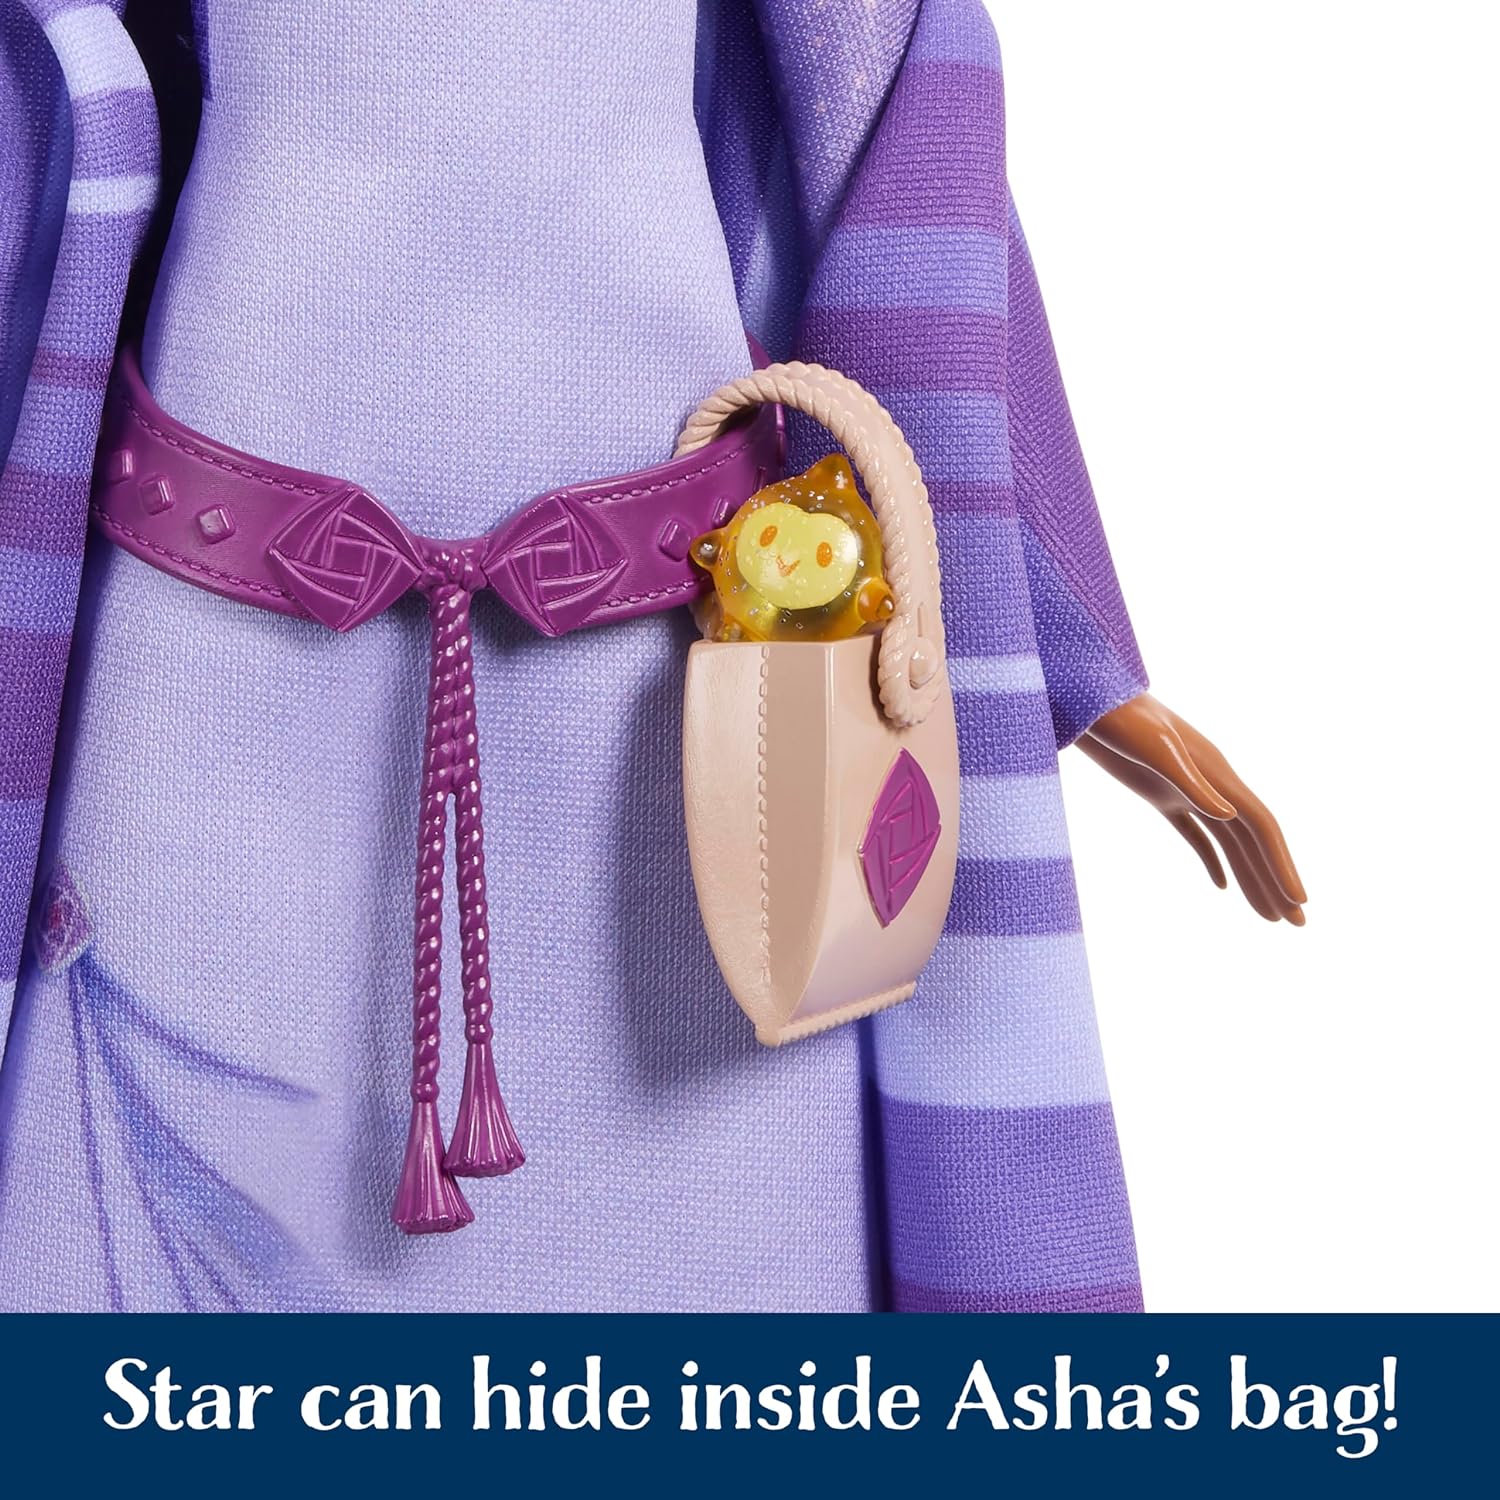 Disney Wish movie 2023 dolls from Mattel - Asha and other